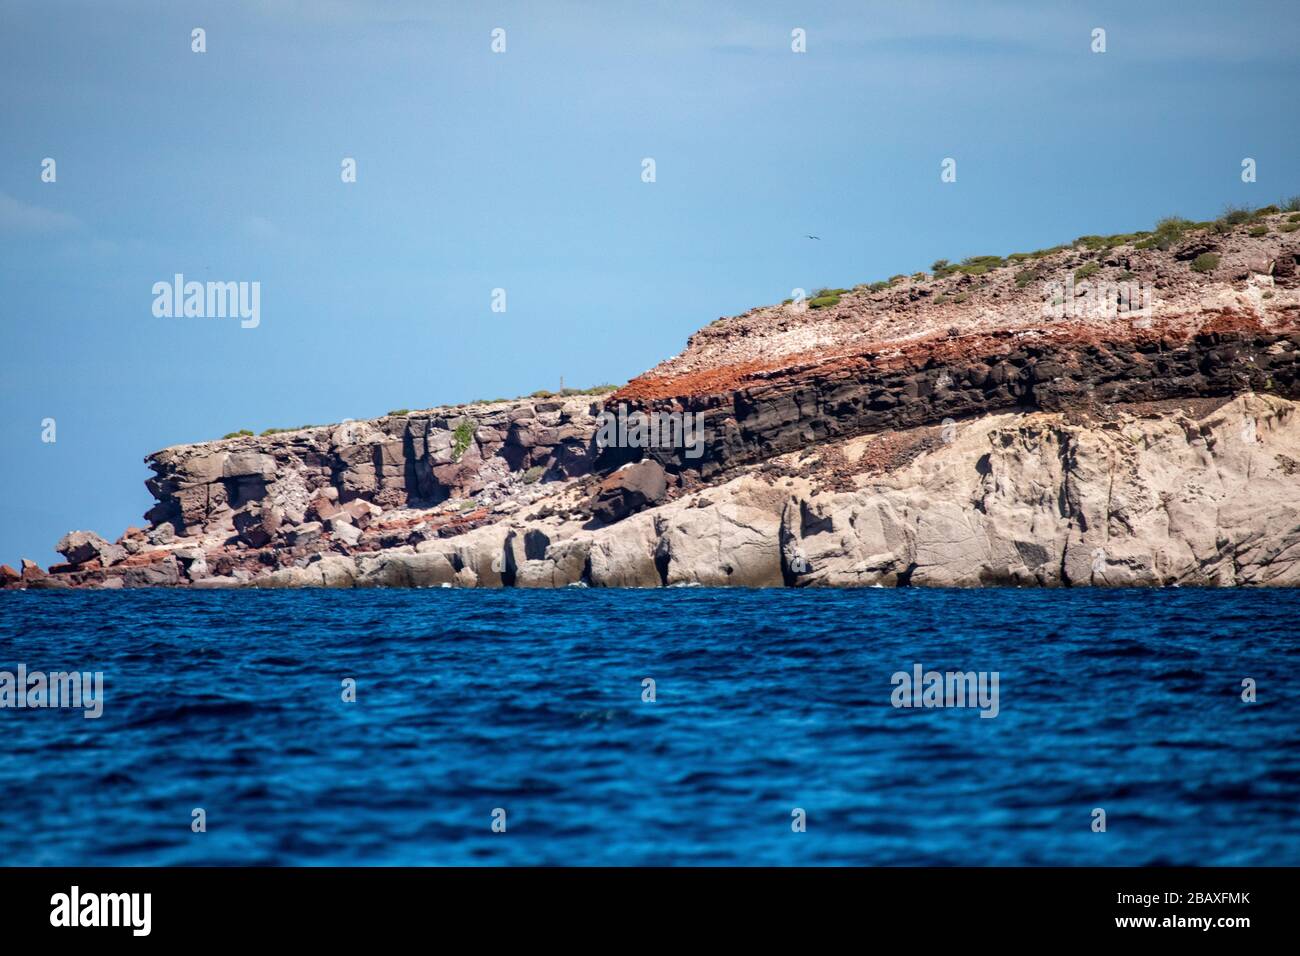 The rocks forming a small mountain with different layers of sediments formed different colors with the blue Cortez sea on the bottom Stock Photo